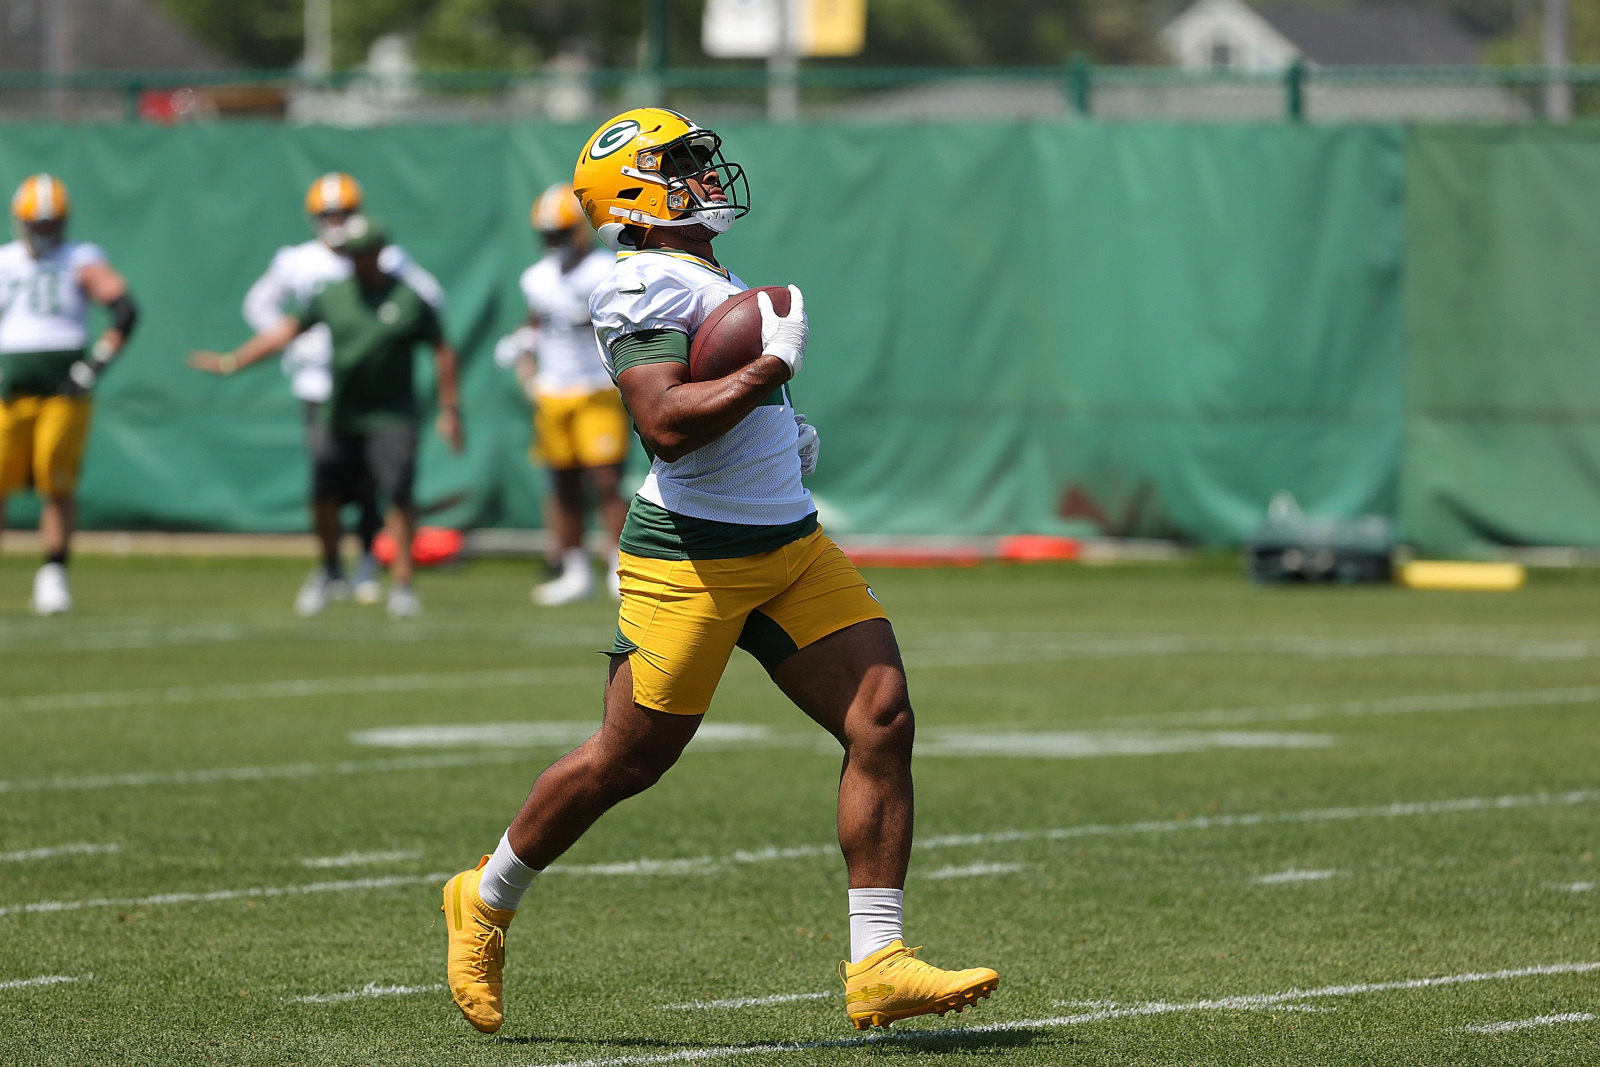 Packers Rookie RB AJ Dillon Looks Absurdly Jacked in Latest Tweet